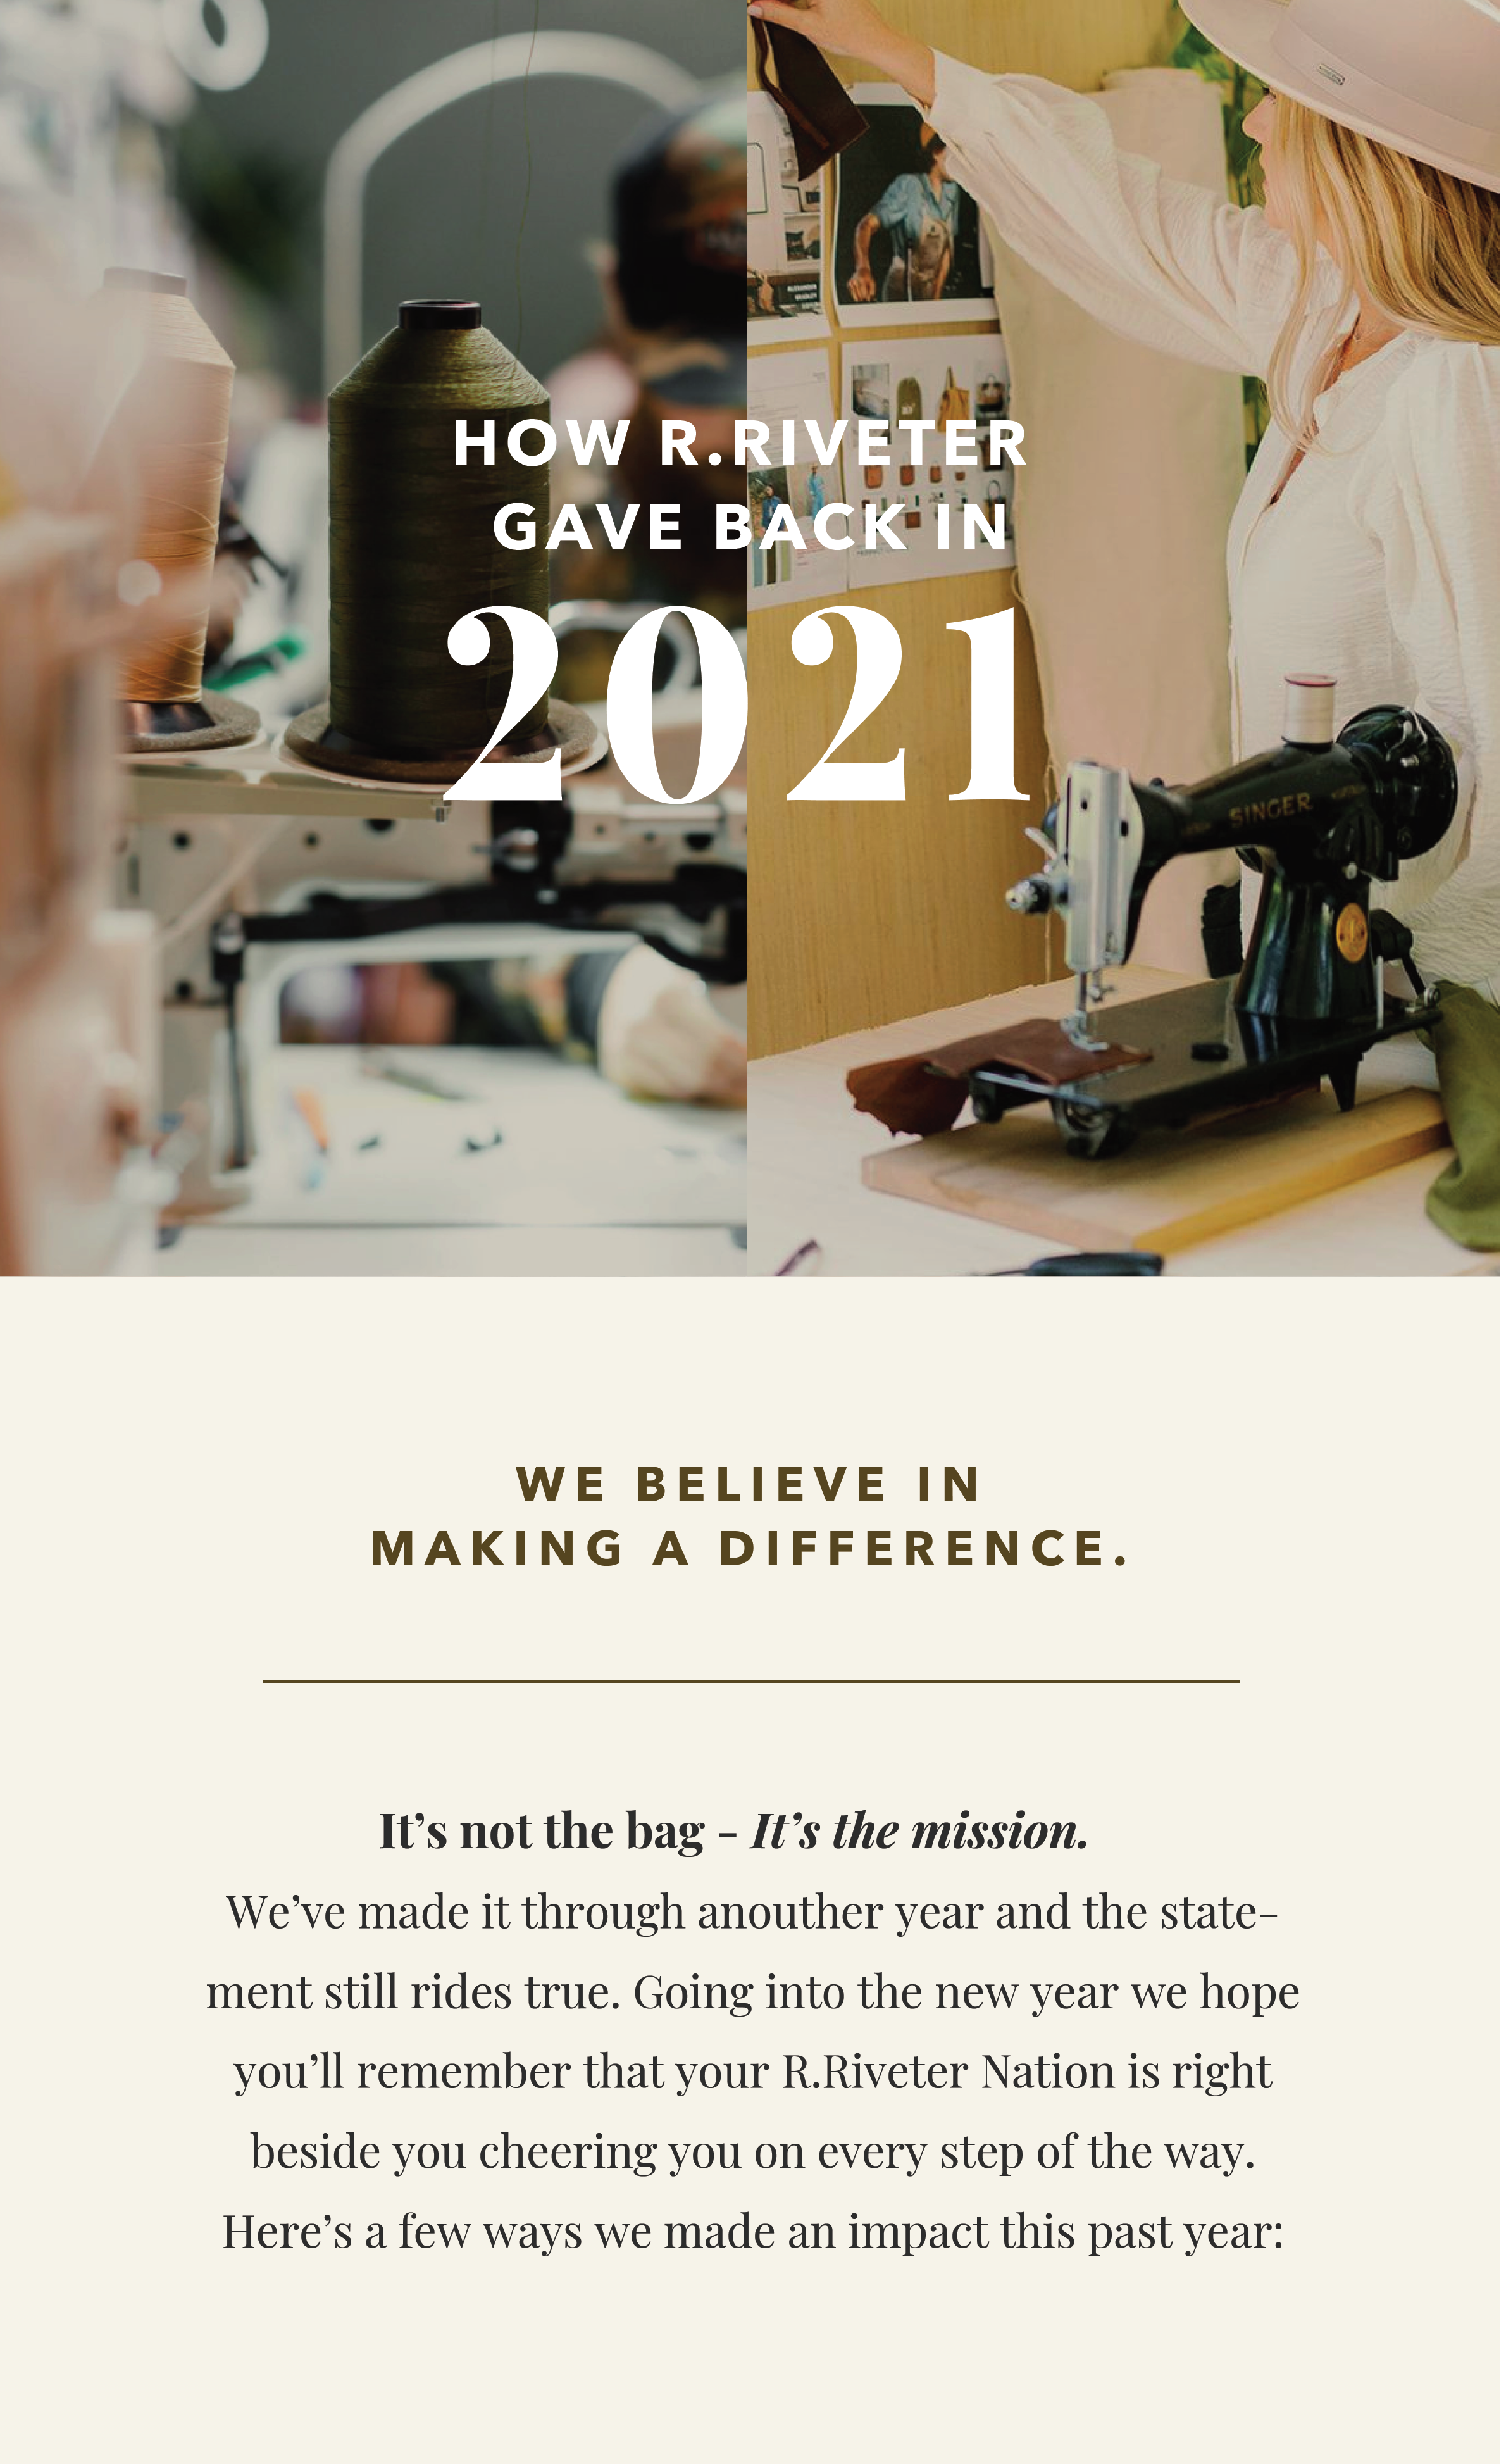 Its not the bag - Its the mission.  We’ve made it through another year and that statement still rings true.  Going into the new year we hope you’ll remember that your Riveter Nation is right beside you cheering you on every step of the way.  Here’s a few ways we made an impact this past year: